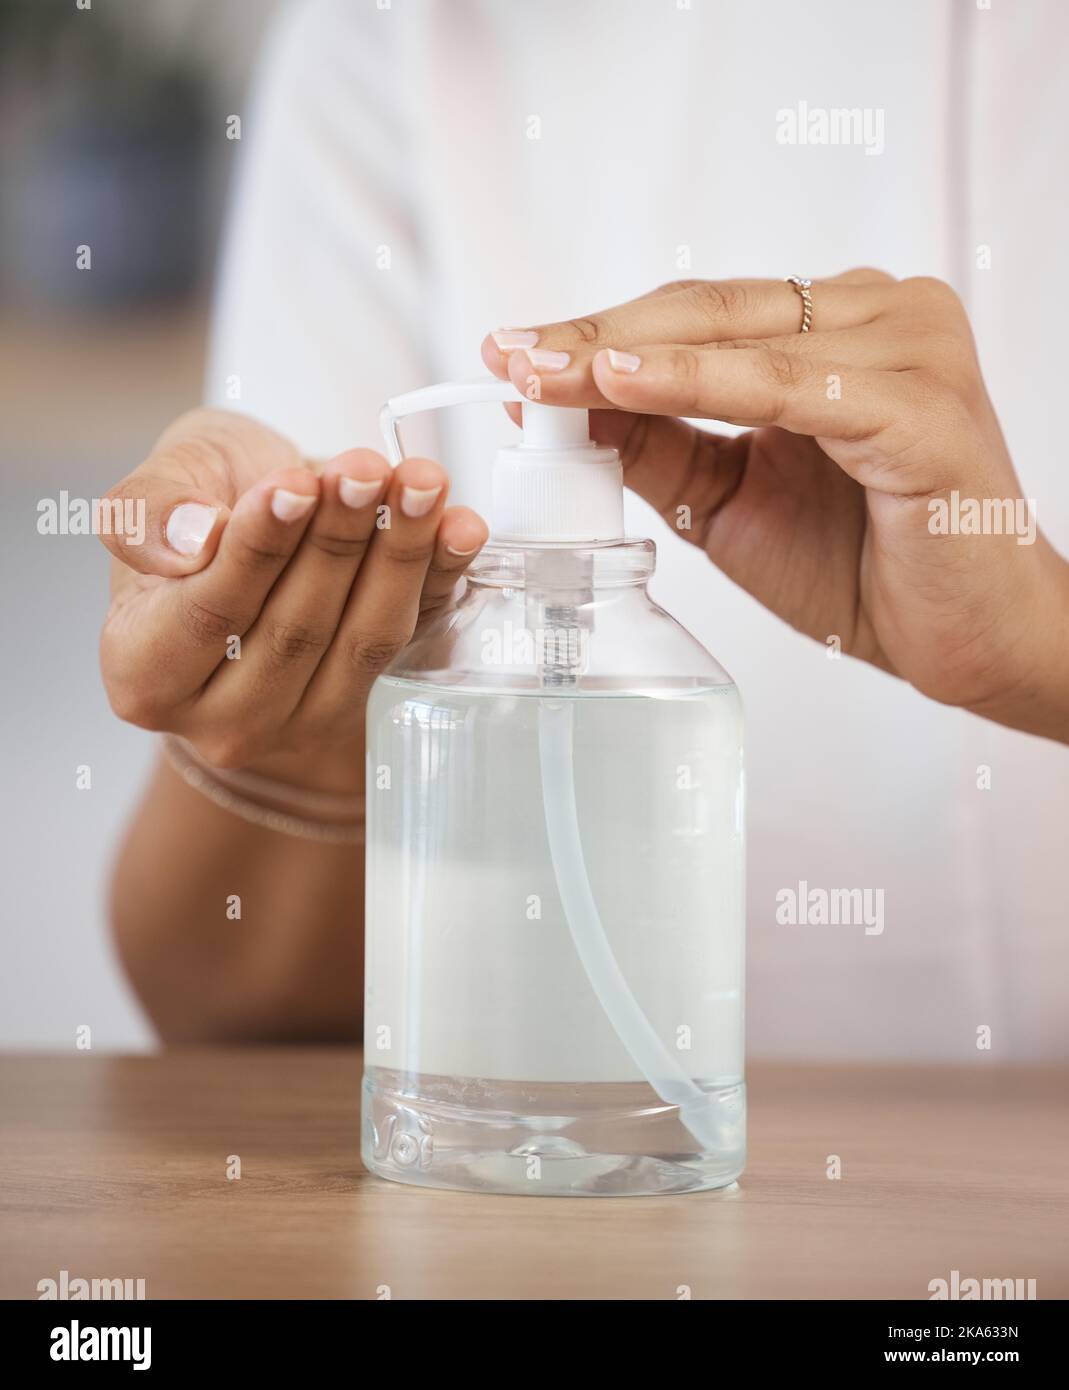 Skincare, safety and hands cleaning bacteria with liquid soap for healthy protection and disinfection. Healthcare, wellness and woman pressing hand Stock Photo